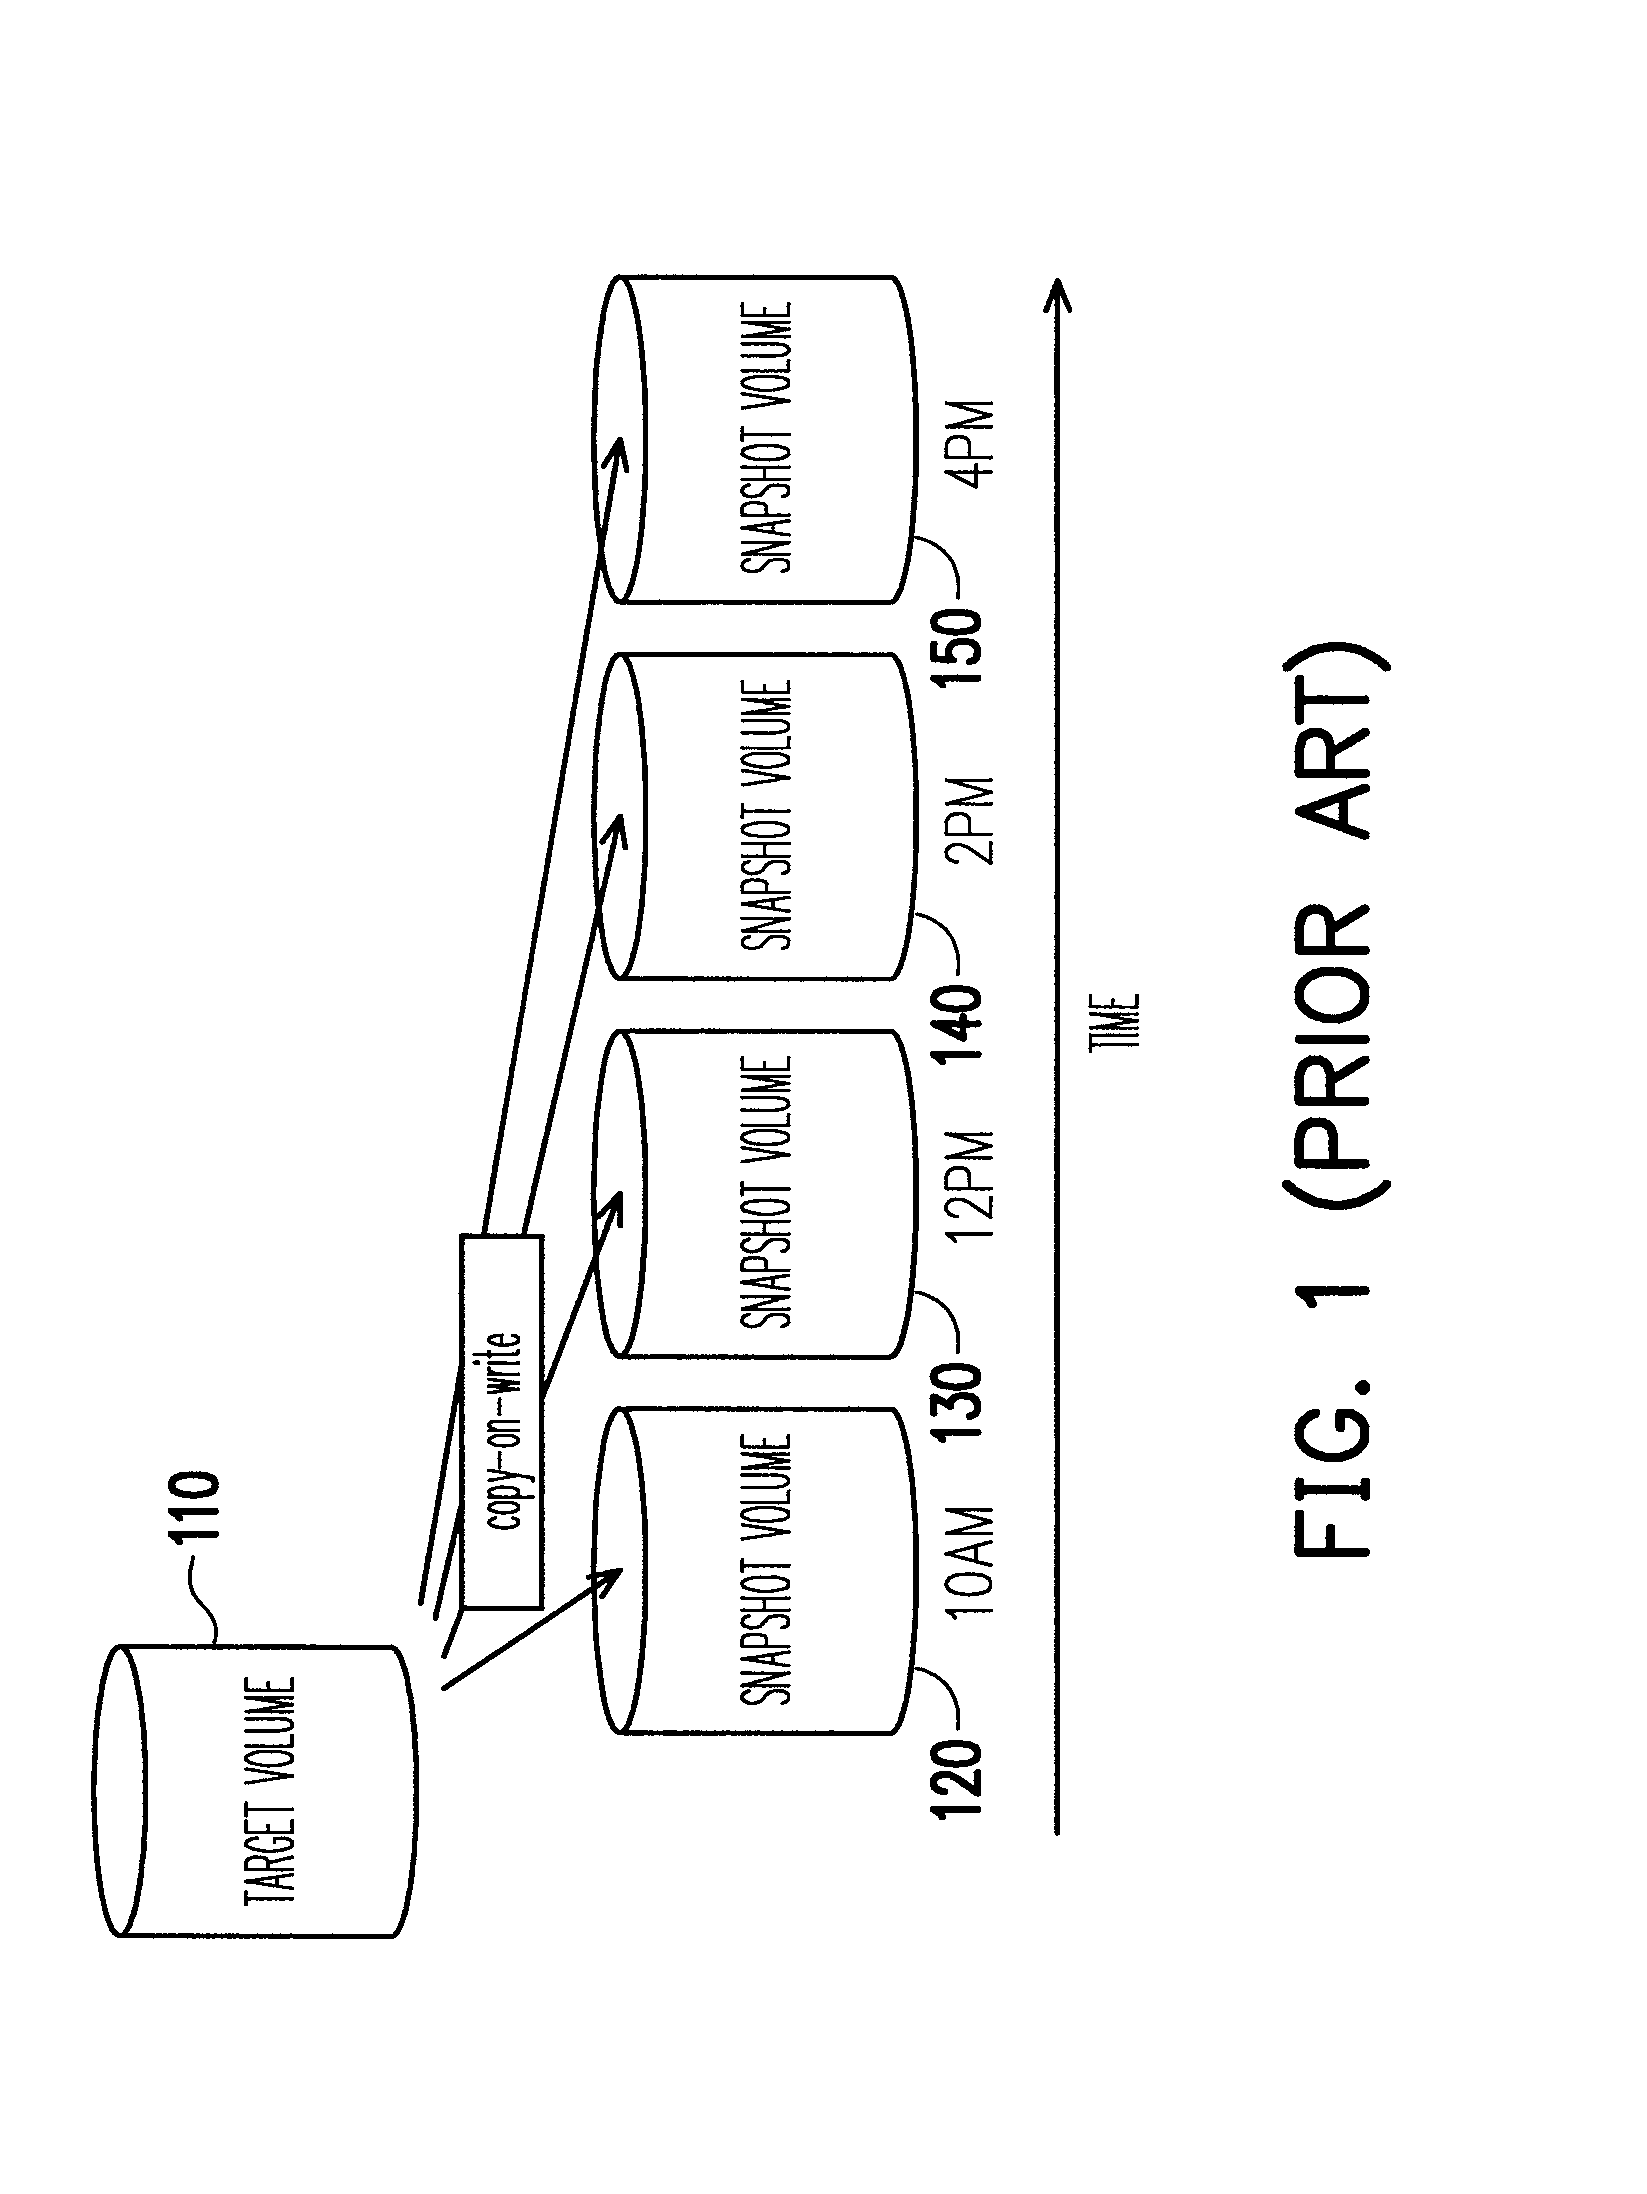 Snapshot mechanism in a data processing system and method and apparatus thereof